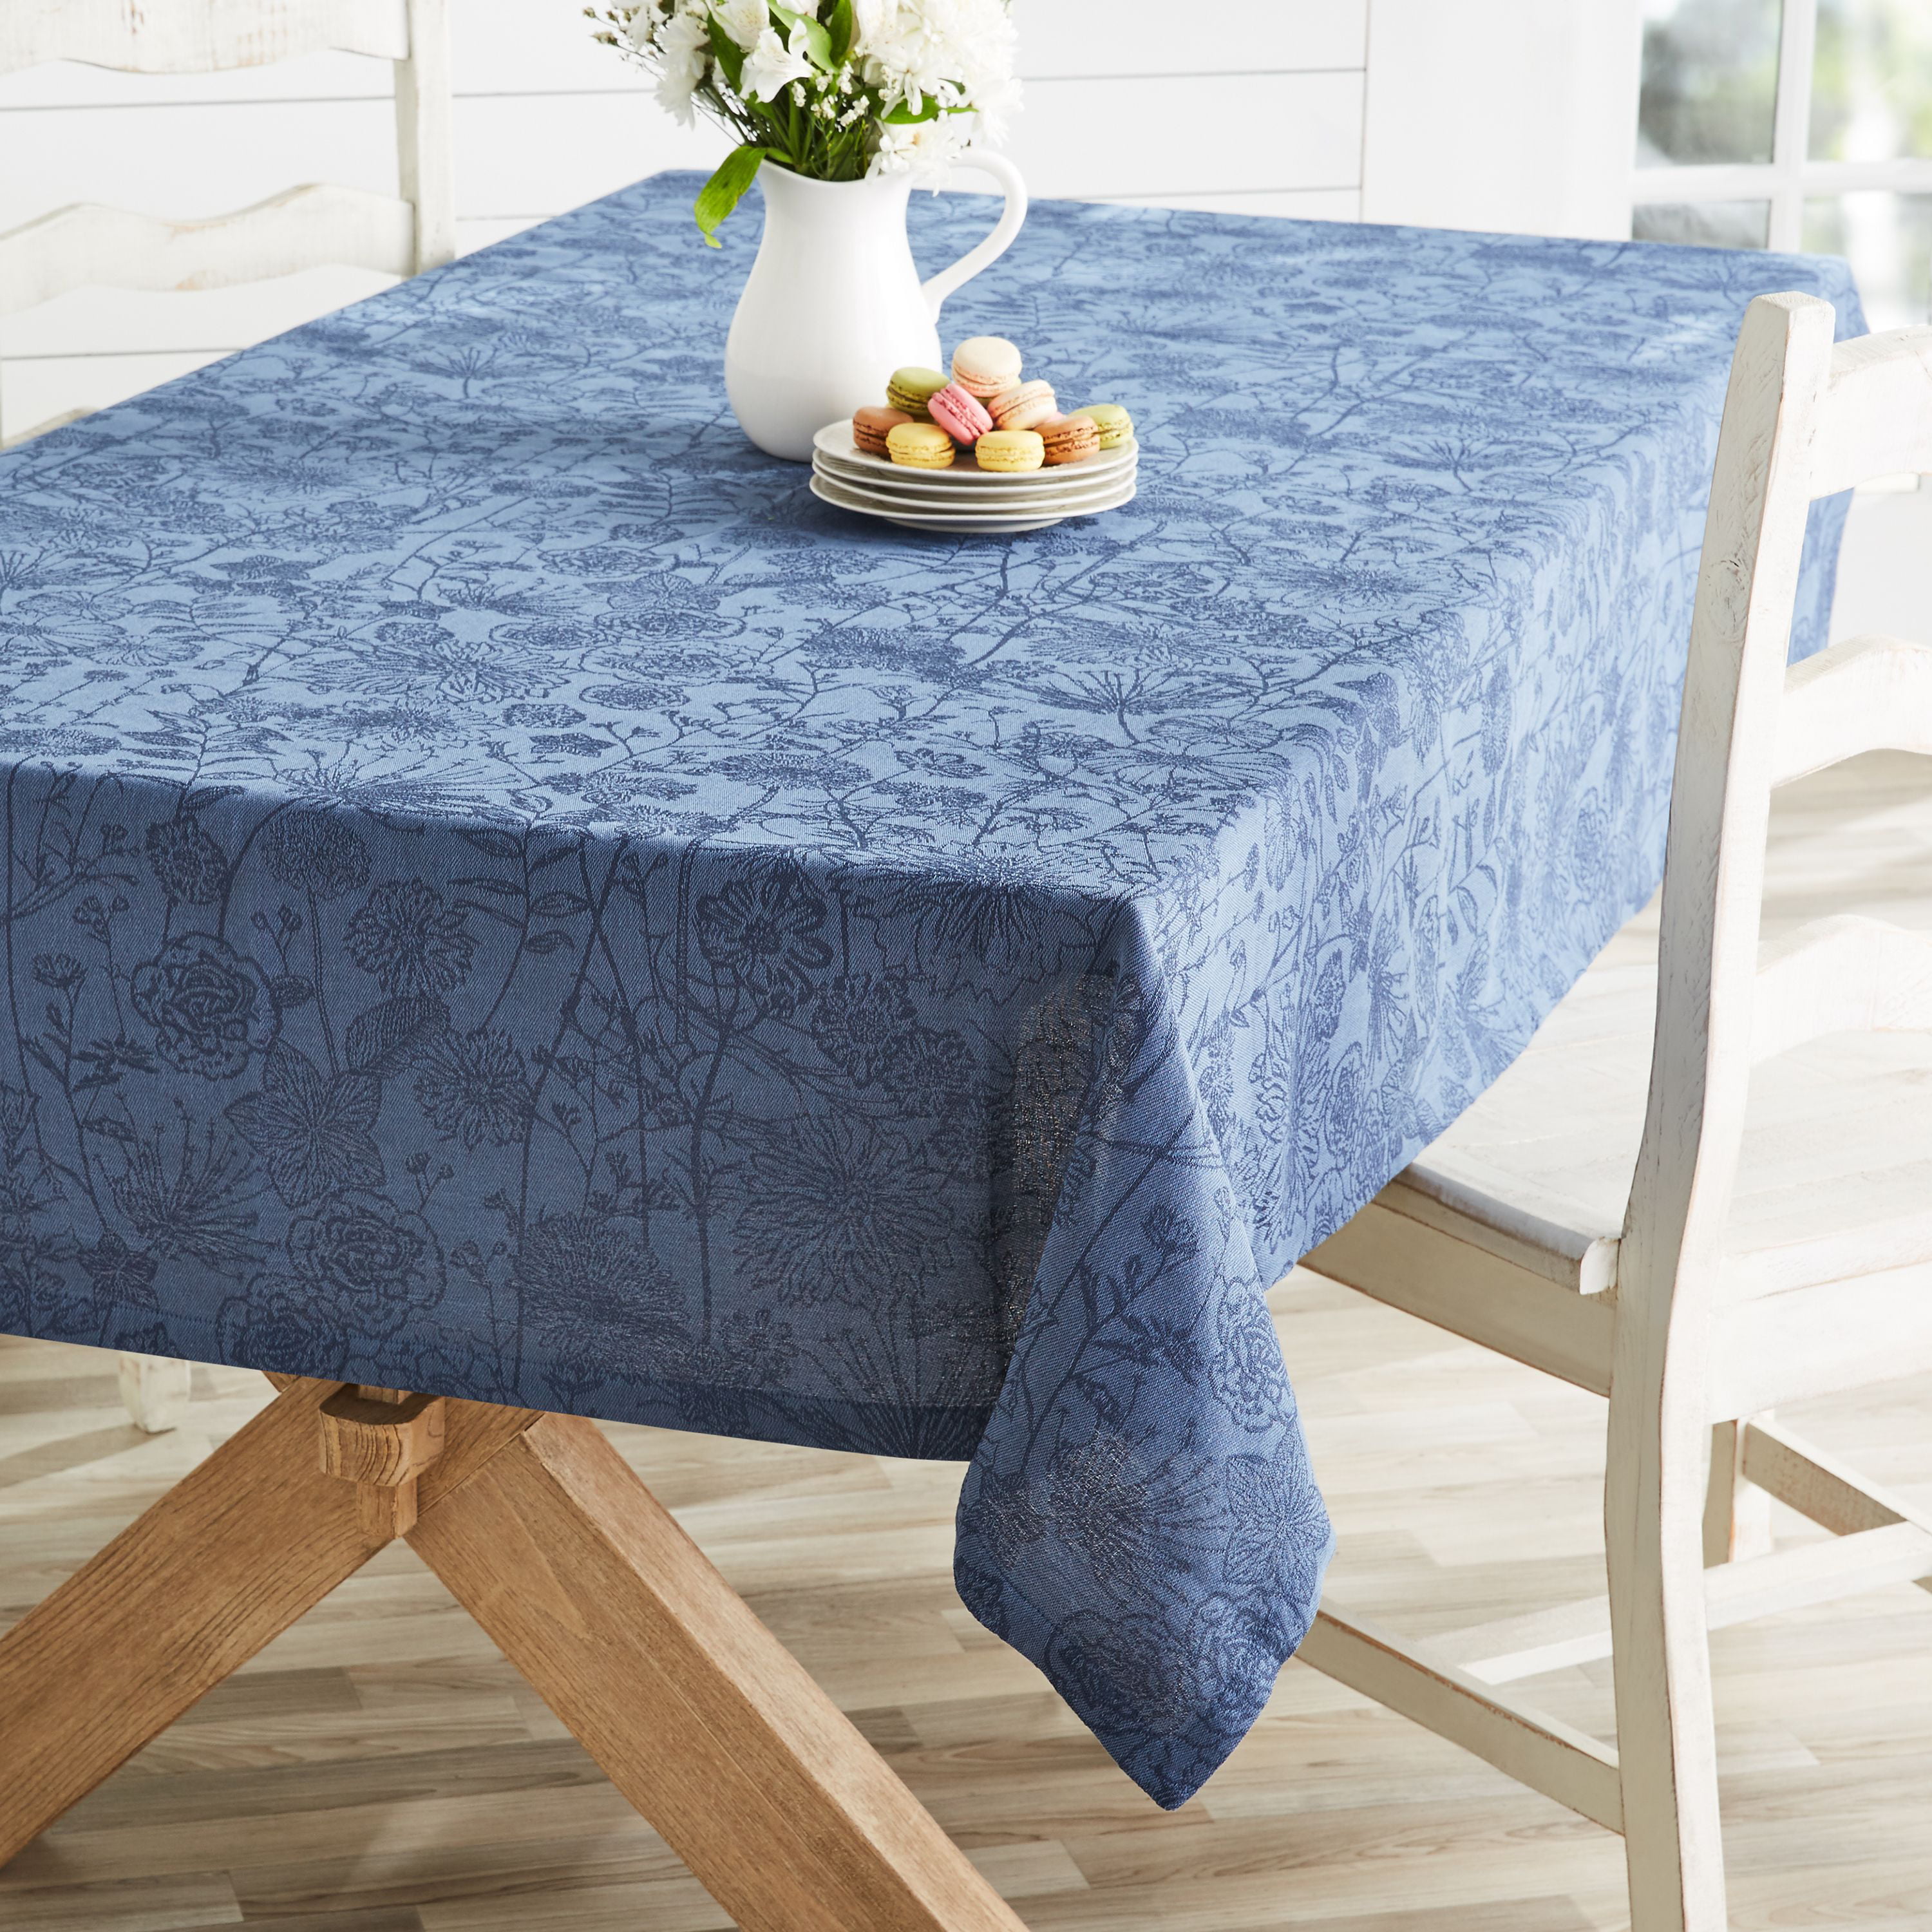 60 X 84 Tablecloth - How To Blog